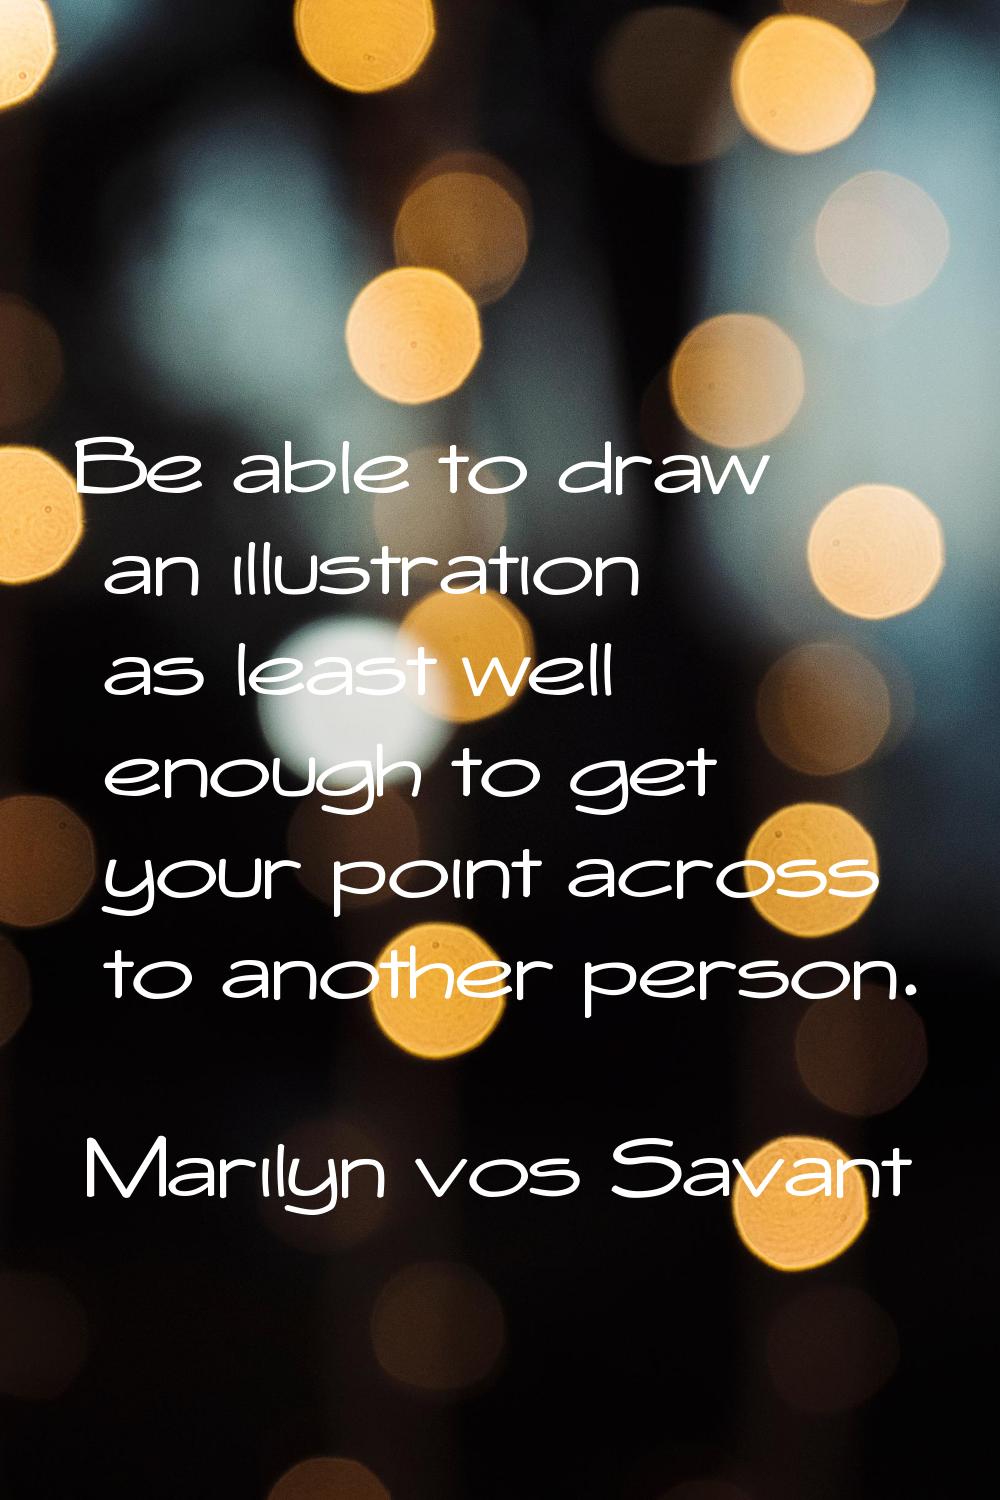 Be able to draw an illustration as least well enough to get your point across to another person.